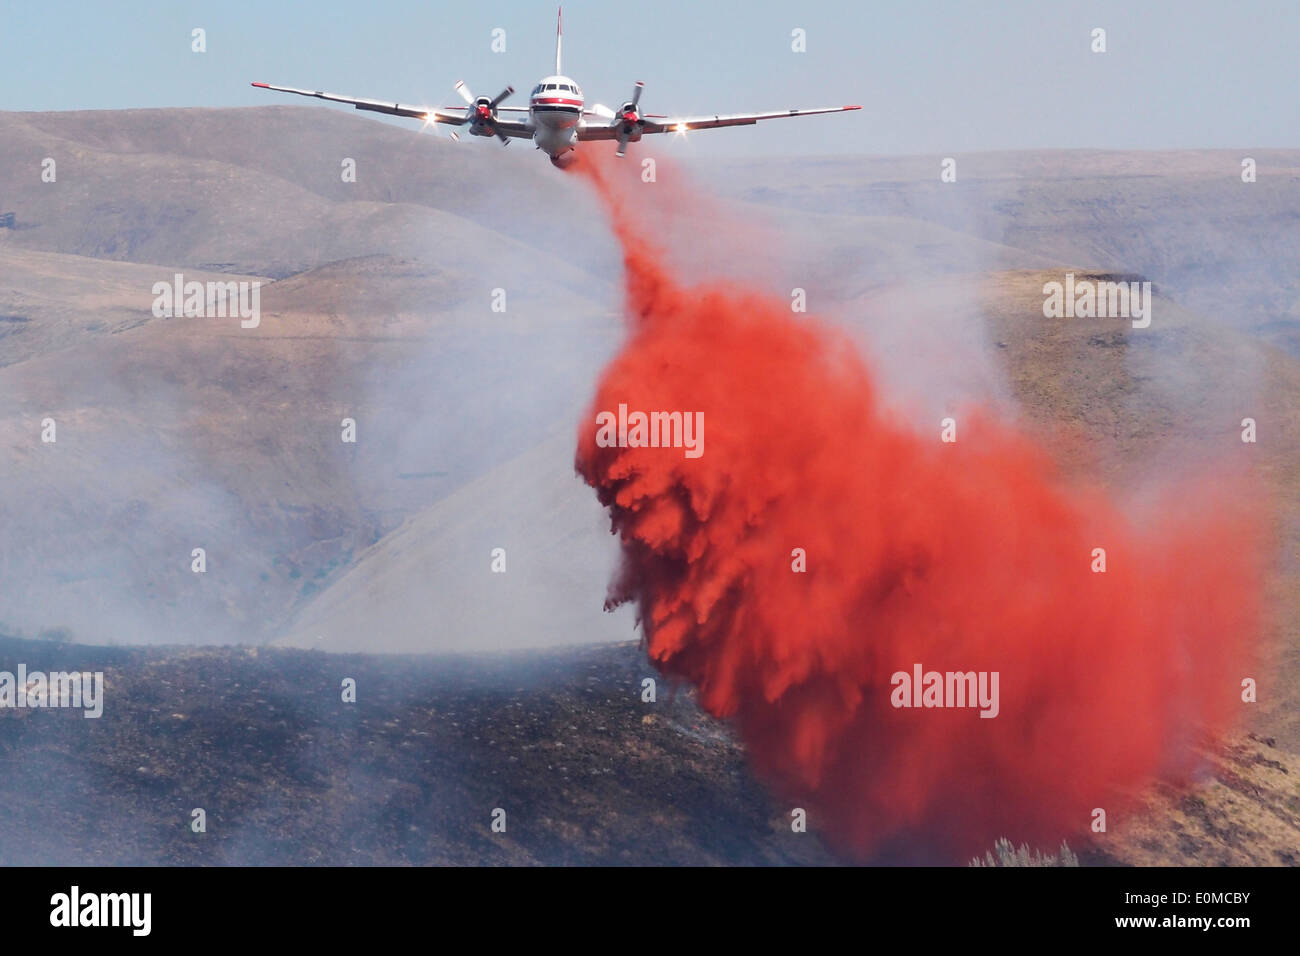 A tanker drops its load of fire retardant on the Brown Road fire in Northern Oregon, 2011 Stock Photo